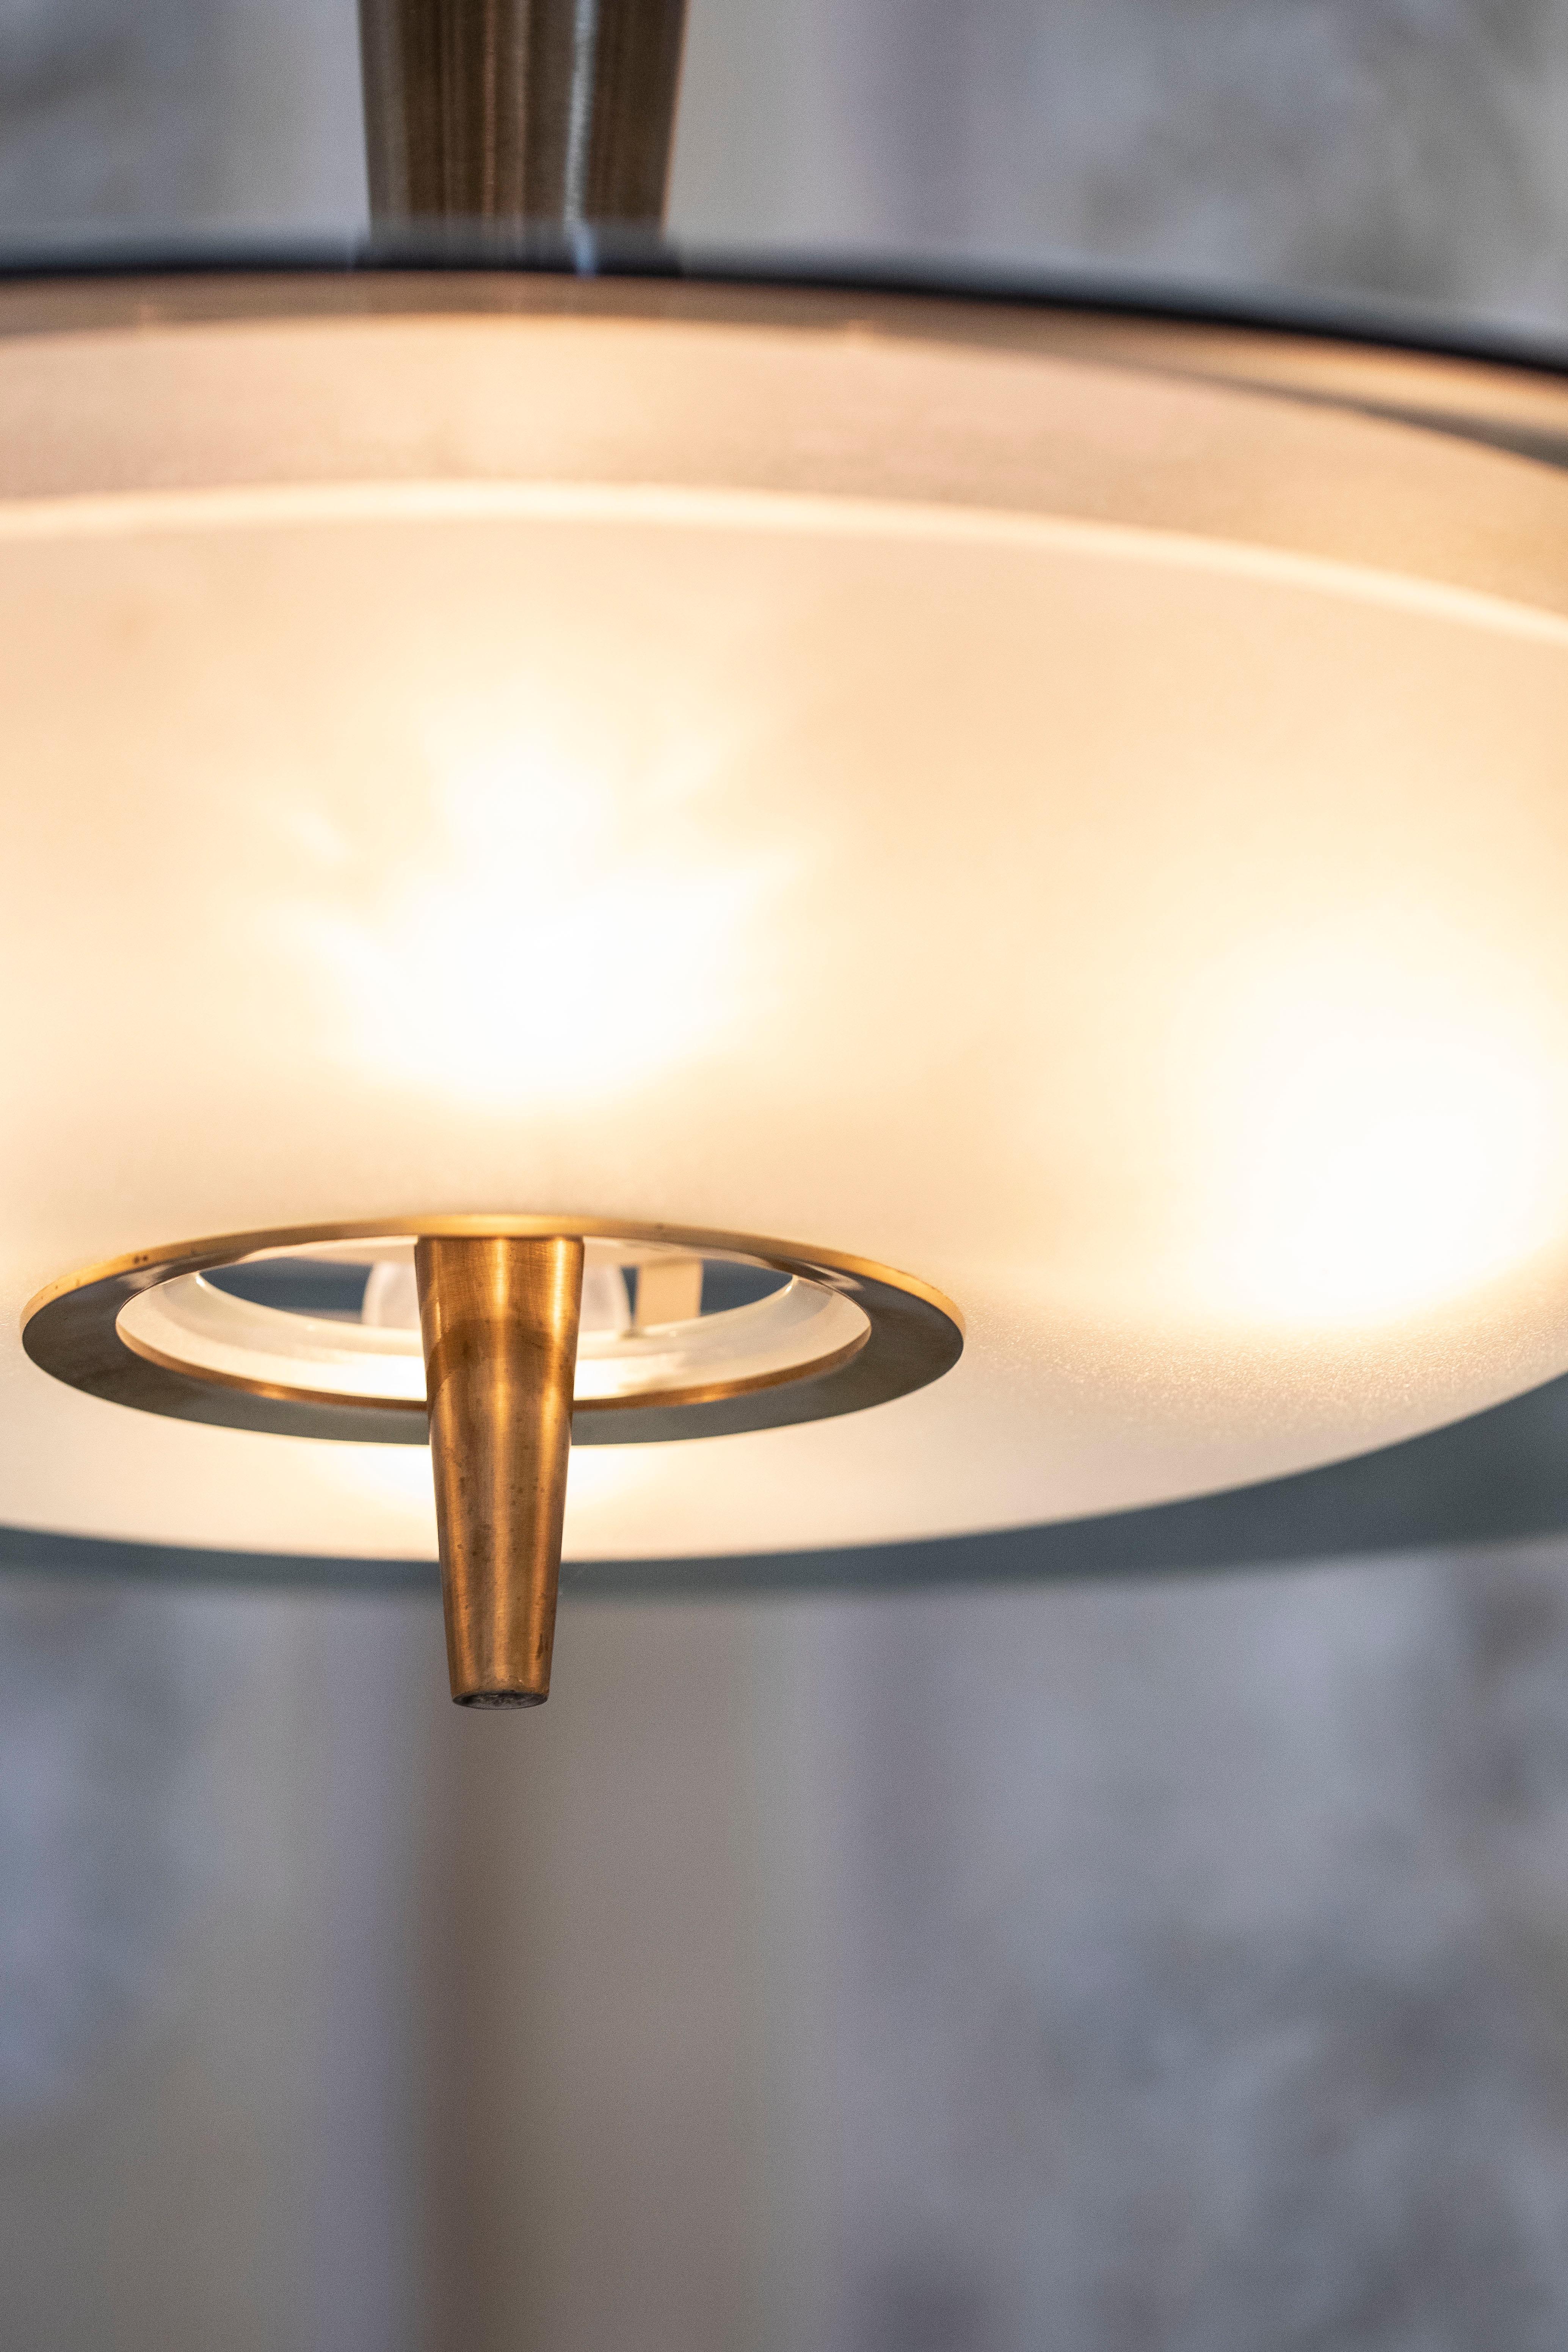 A stunning modernist chandelier by Max Ingrand for Fontana Arte. A beautiful, large and curved glass shade arcs over a convex satinated glass bowl. A particular tapering conical stem with pointed finial in polished brass keeps the two part together.